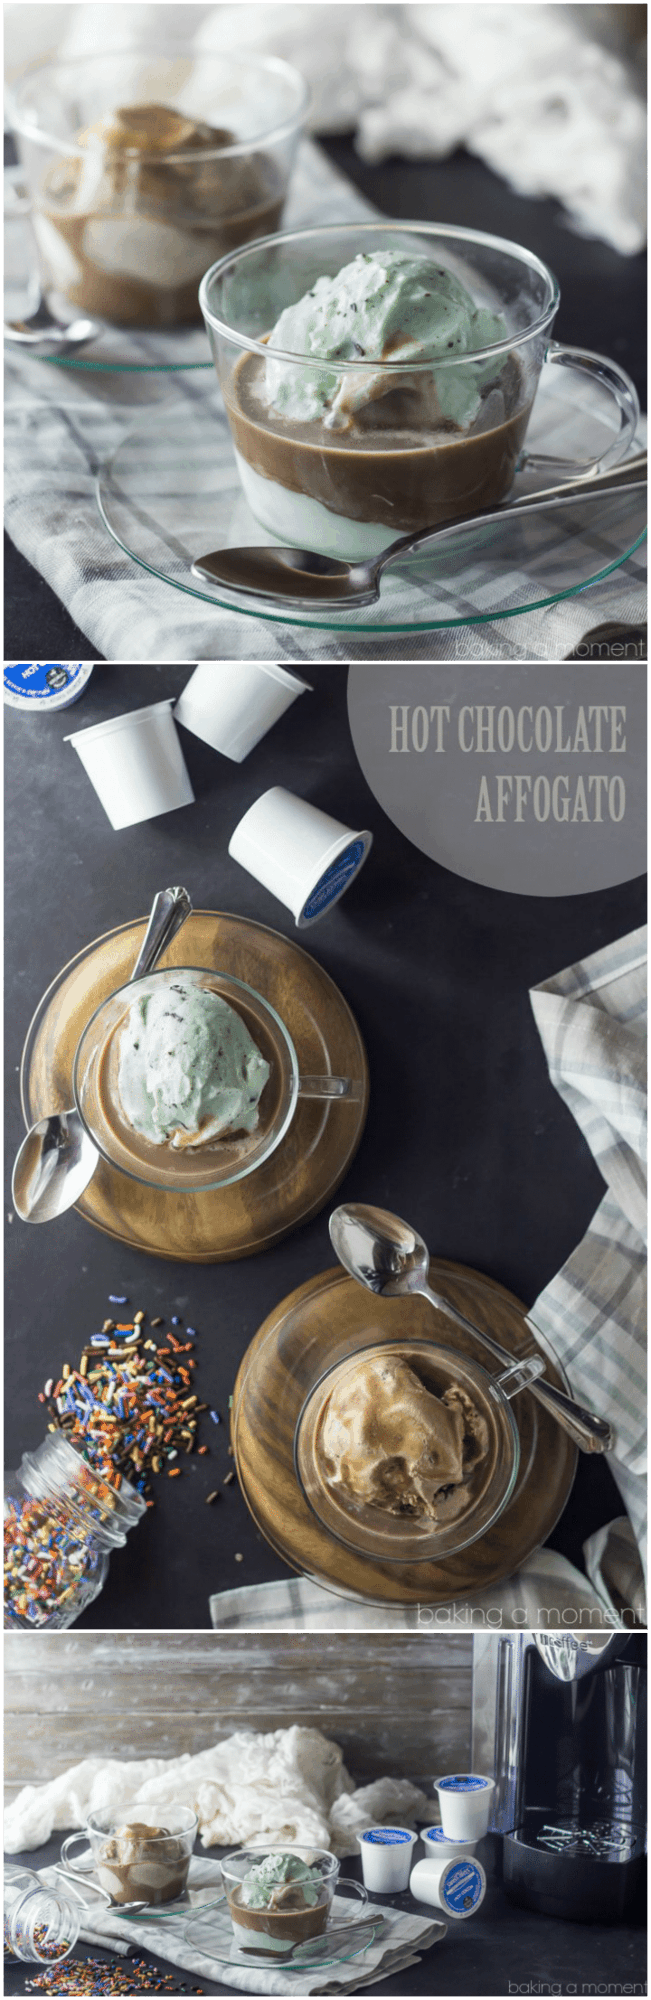 Hot Chocolate Affogato- cool, creamy ice cream, drowned in rich hot chocolate!  So easy and such a treat #ad